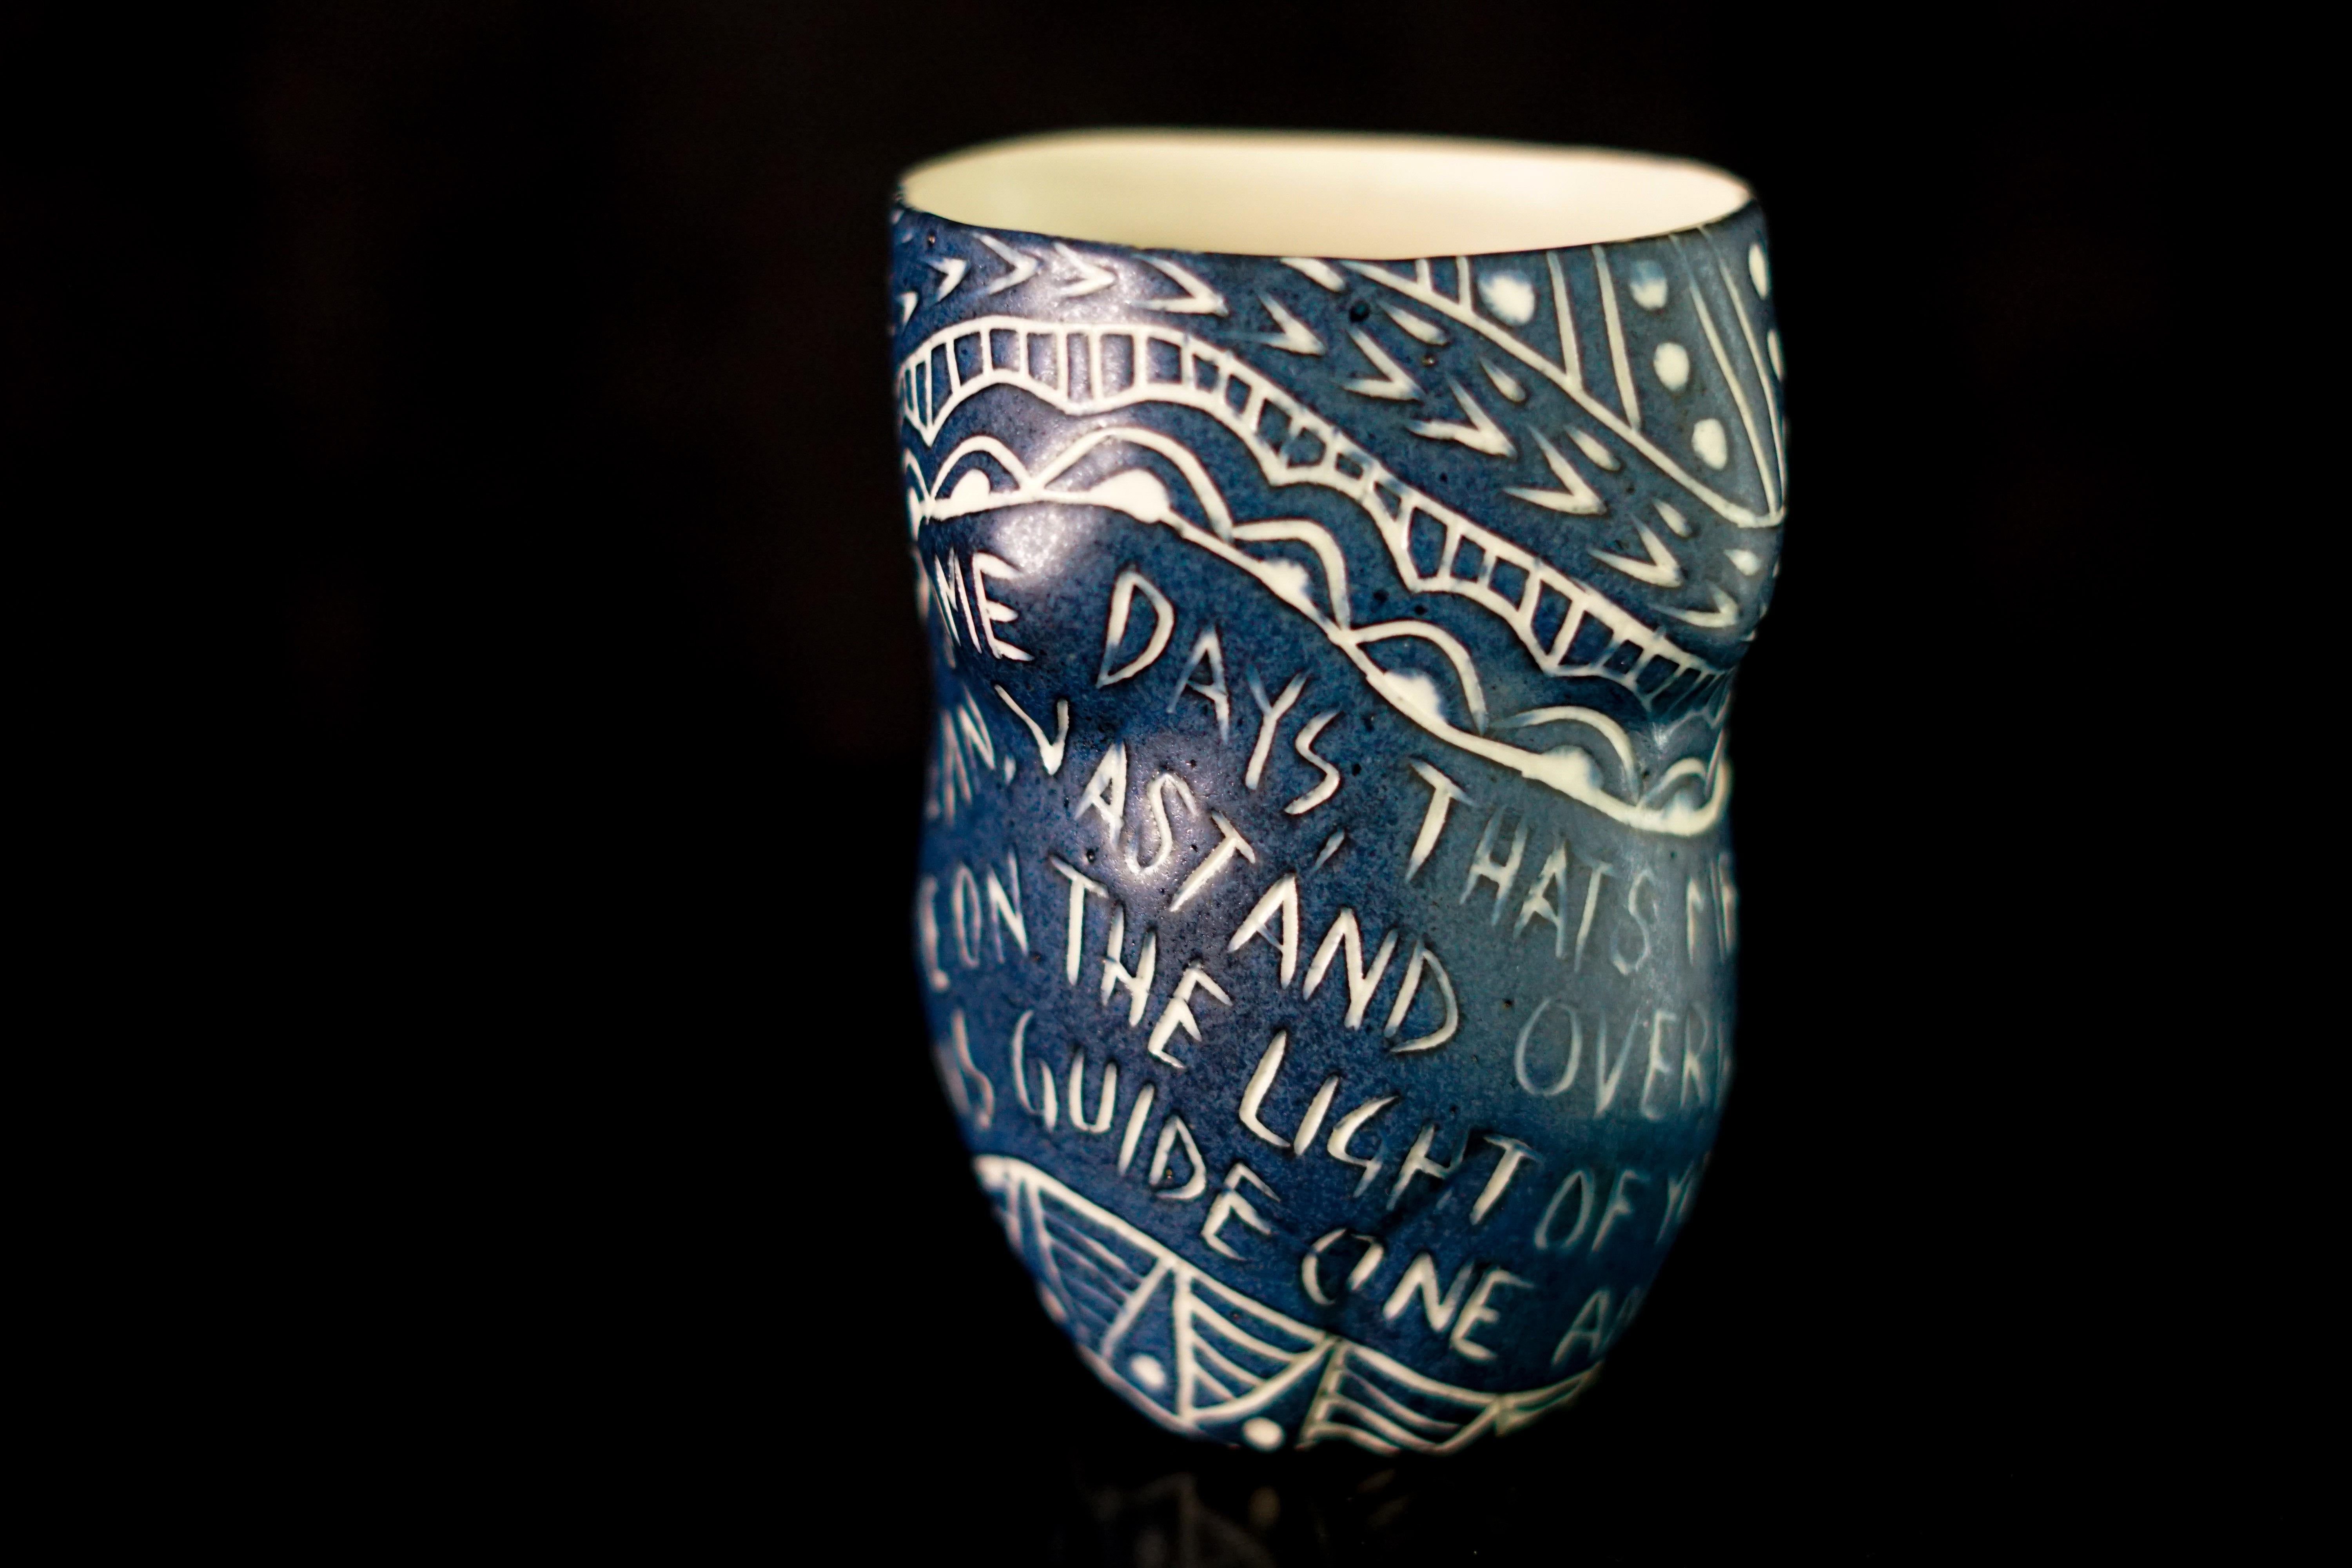 Set of 3 Handmade Porcelain Cups with Sgraffito Detailing - Black Figurative Sculpture by Alex Hodge